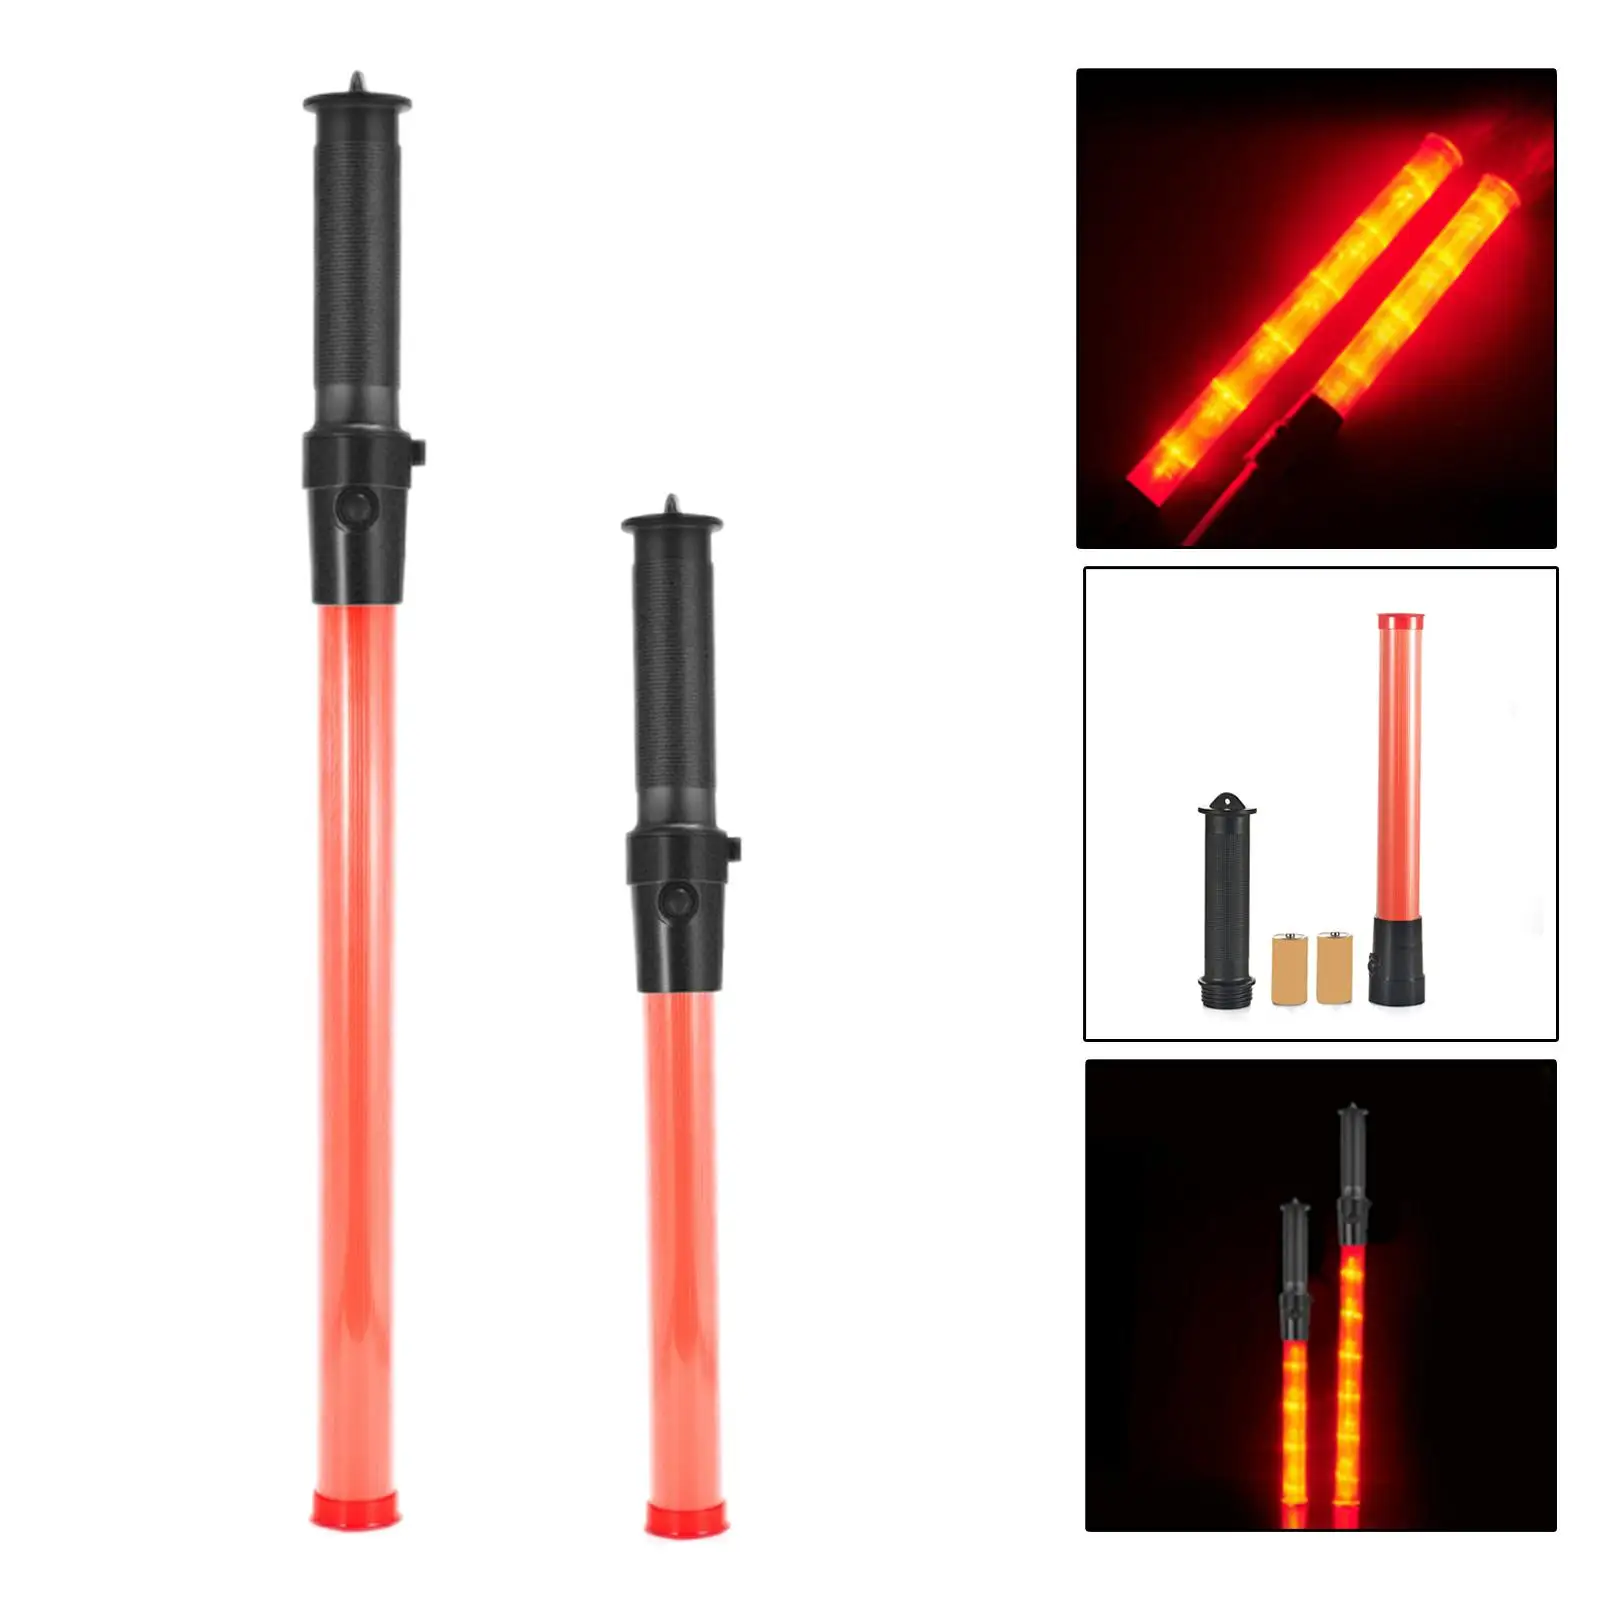 Using 2 D-Size Batteries Not Includ 2 PC 21inch Signal Traffic Safety Wand Baton Led Light with 3 Discoloration Flashing Modes,Signal Indicator Stick for Traffic Control Parking Guide Red&Green 